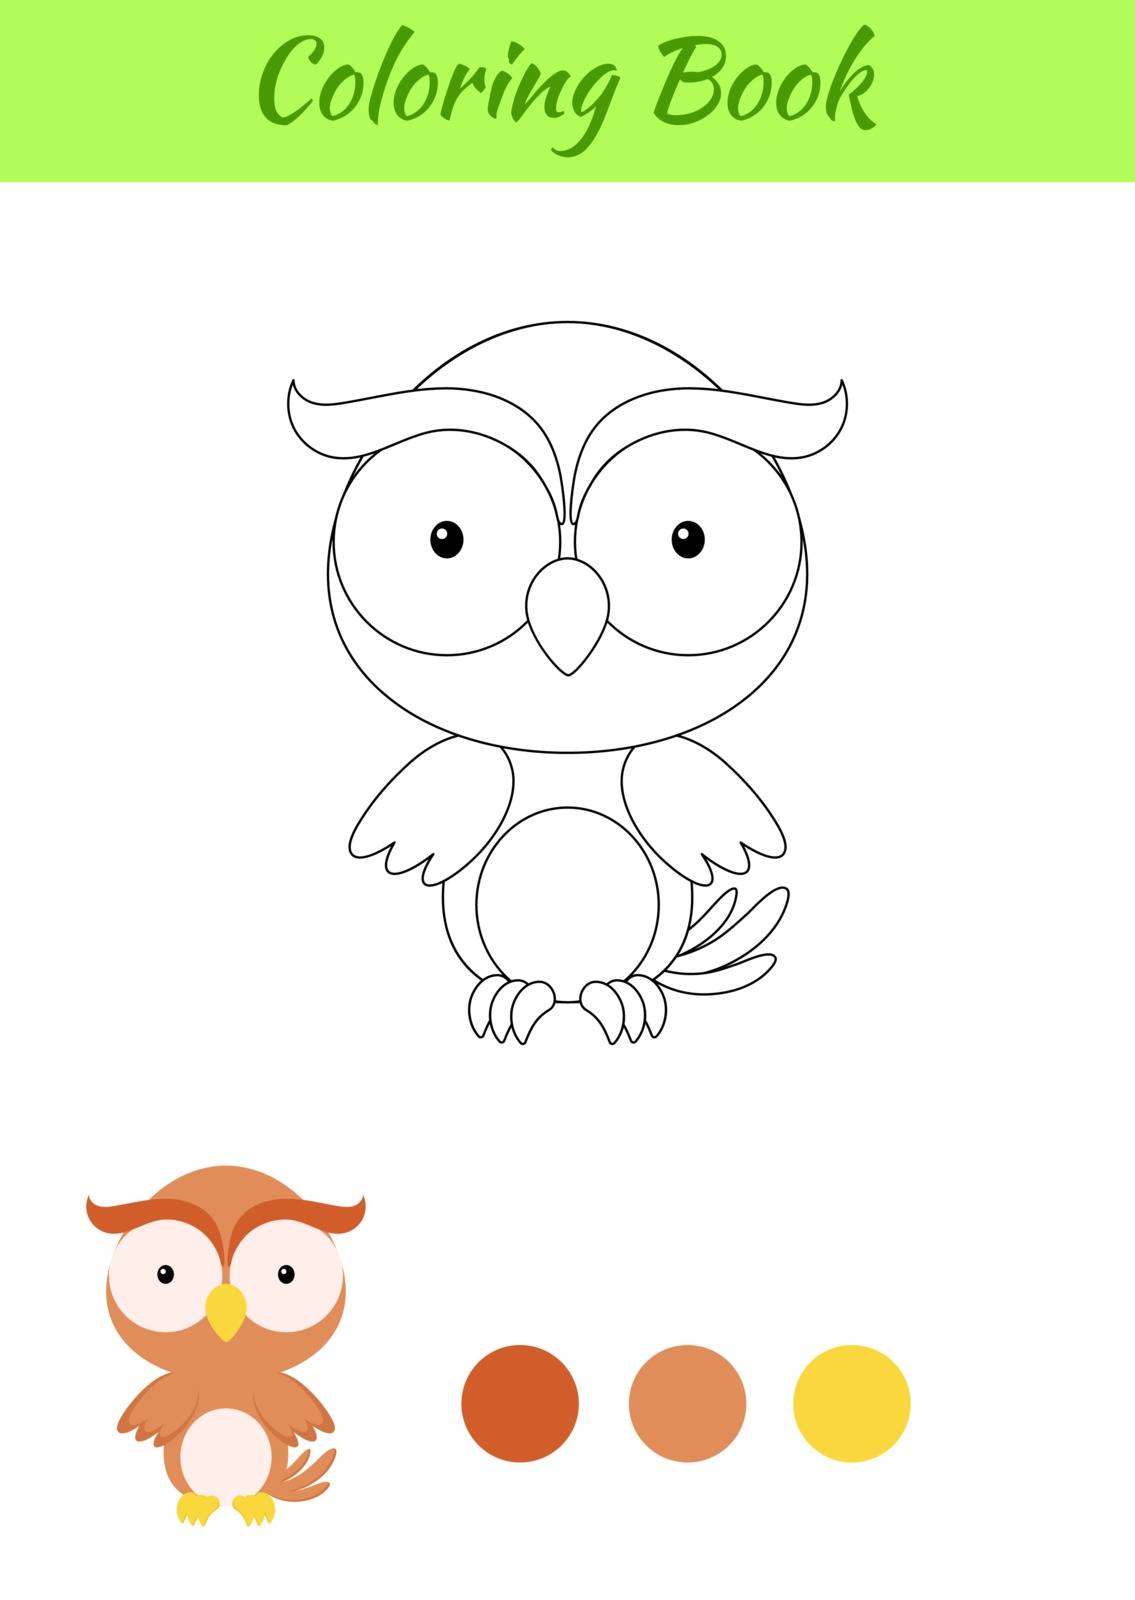 Coloring page happy little baby owl. Printable coloring book for by Melnyk